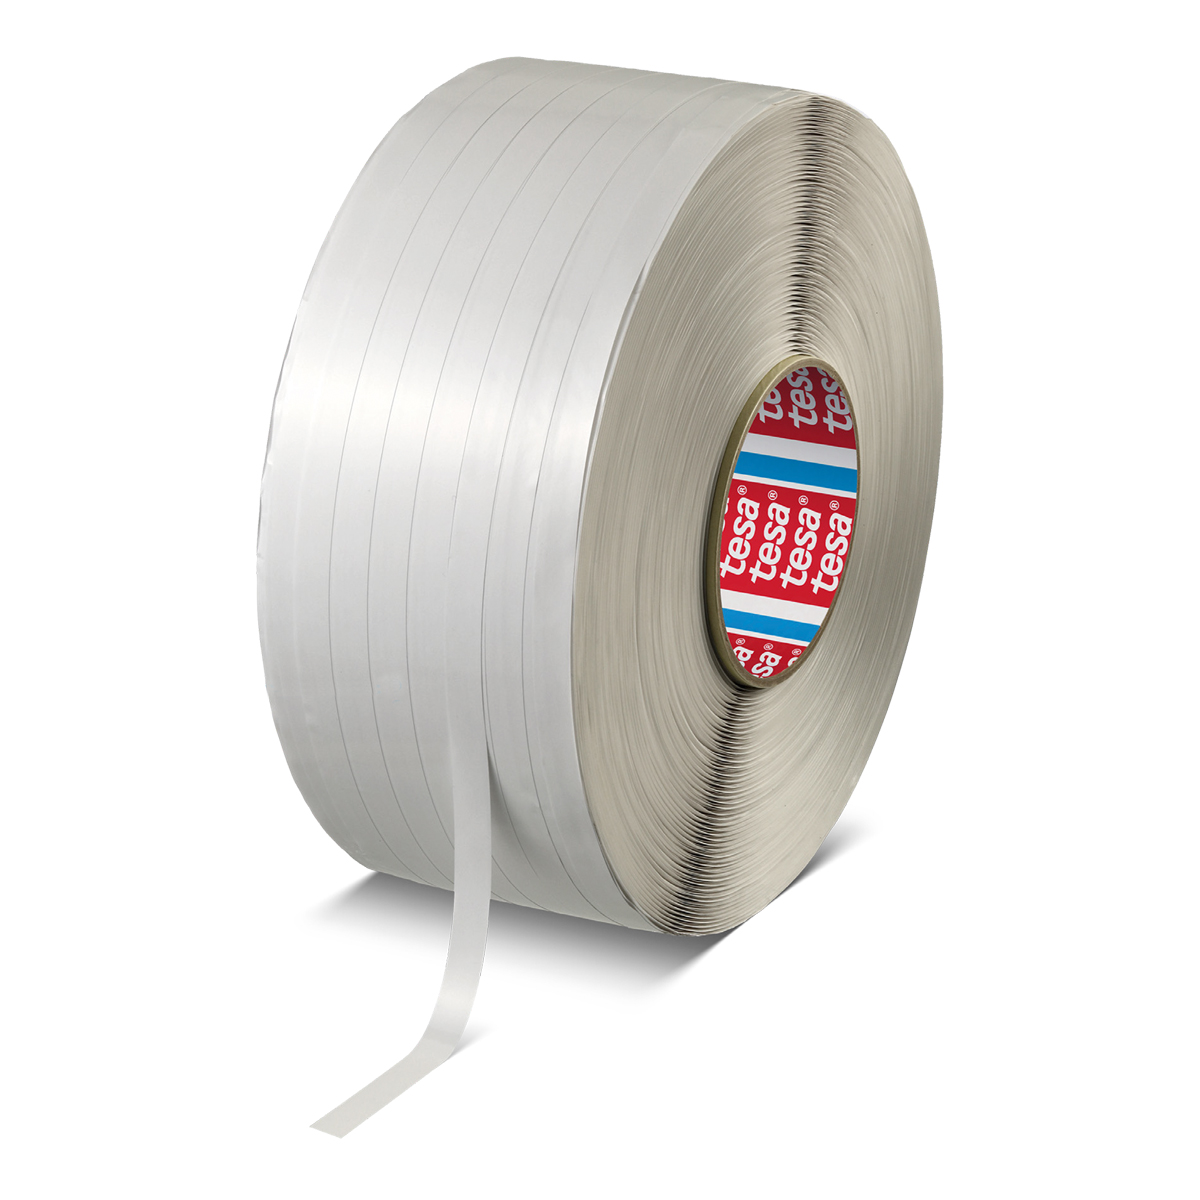 Convenient tape for easy and safe applicationi: tesa® 6965 – Team 4965 Fingerlift